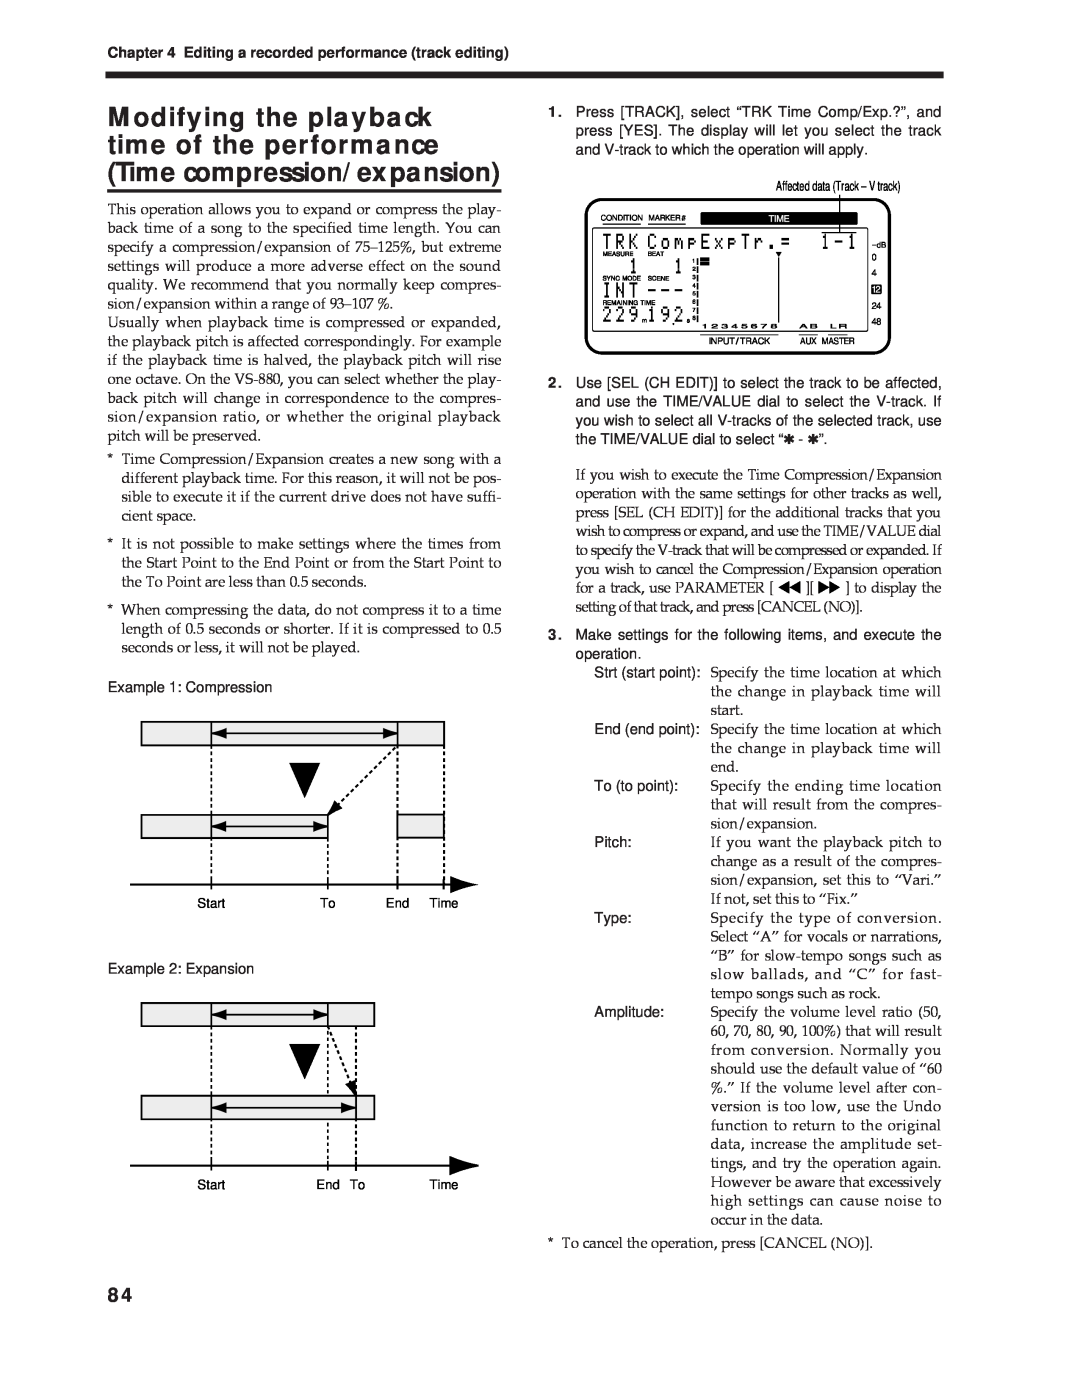 Roland Vs-880 important safety instructions To cancel the operation, press CANCEL NO 